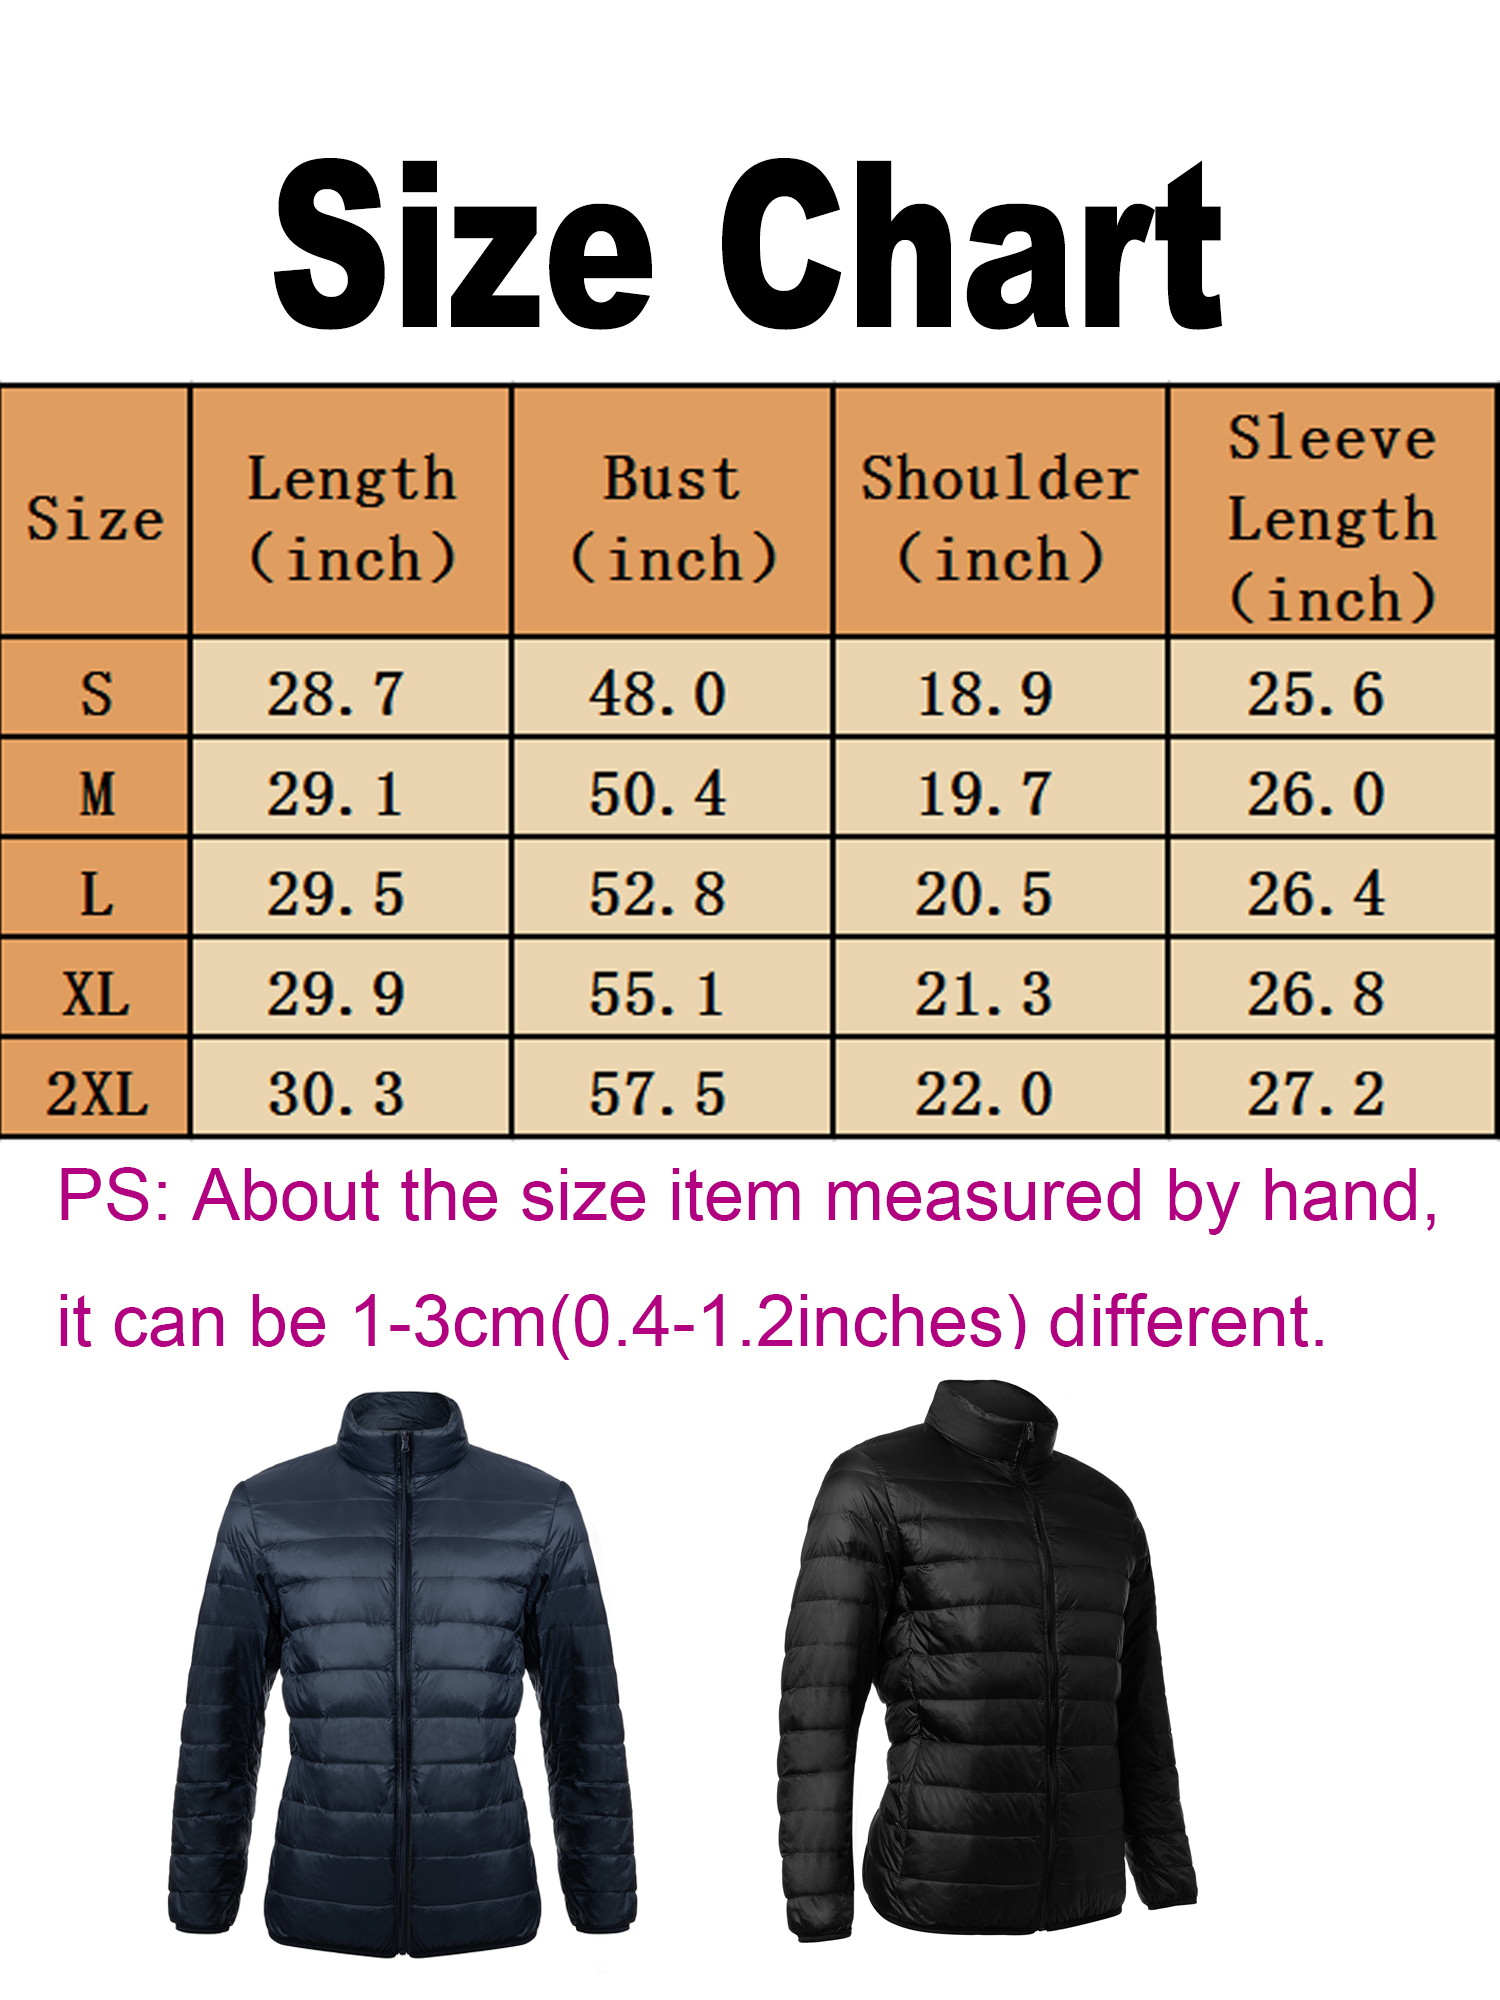 Mens Down Jacket, Light Weight Puffer Coat for Men, Men's Down Puffer Jacket Packable Puffer Jacket Windproof Zip Up Warm Coat Outerwear - image 3 of 7